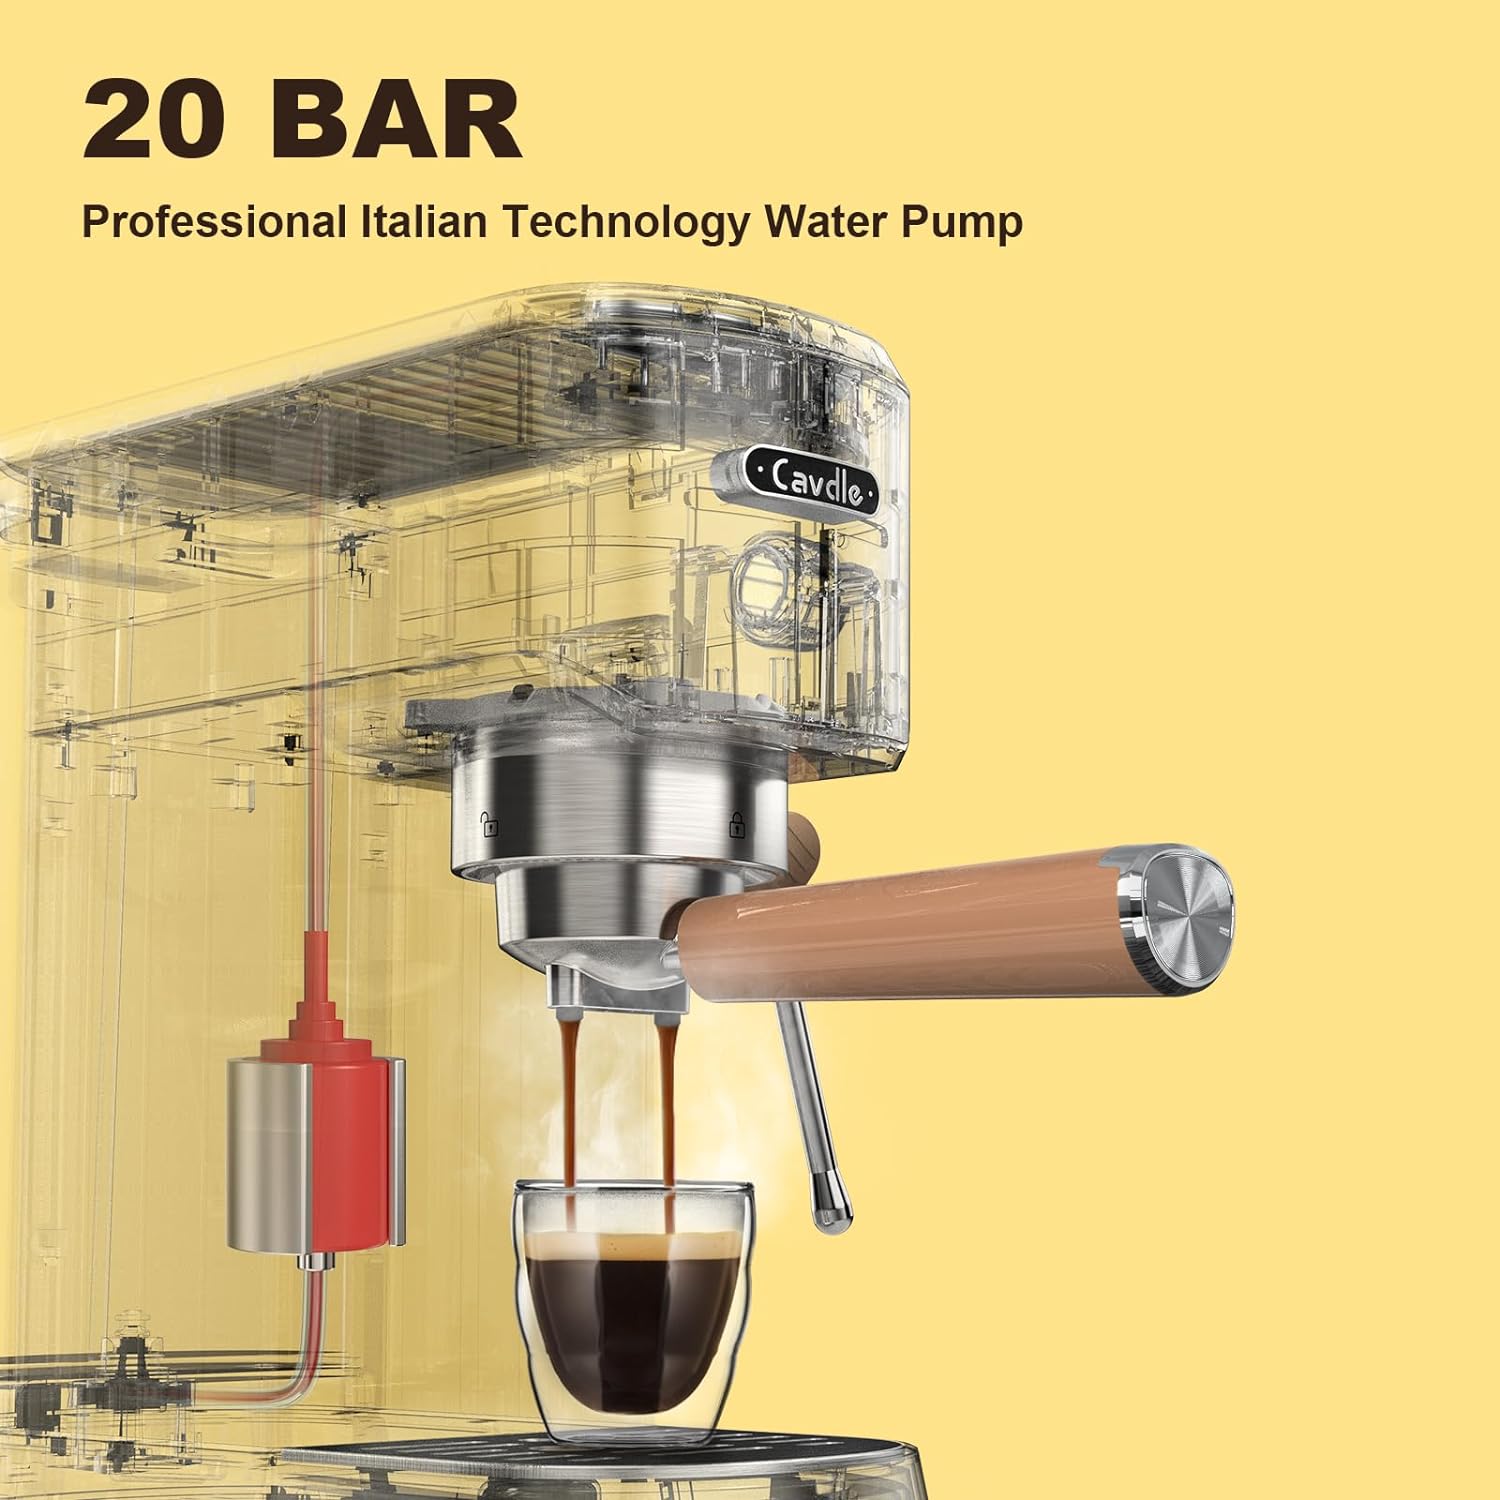 CAVDLE Espresso Machine 20 Bar, Professional Espresso Maker with Milk Frother Steam Wand, Compact Coffee Machine with 35oz Removable Water Tank for Cappuccino, Latte (Stainless Steel, Mocha Cream)